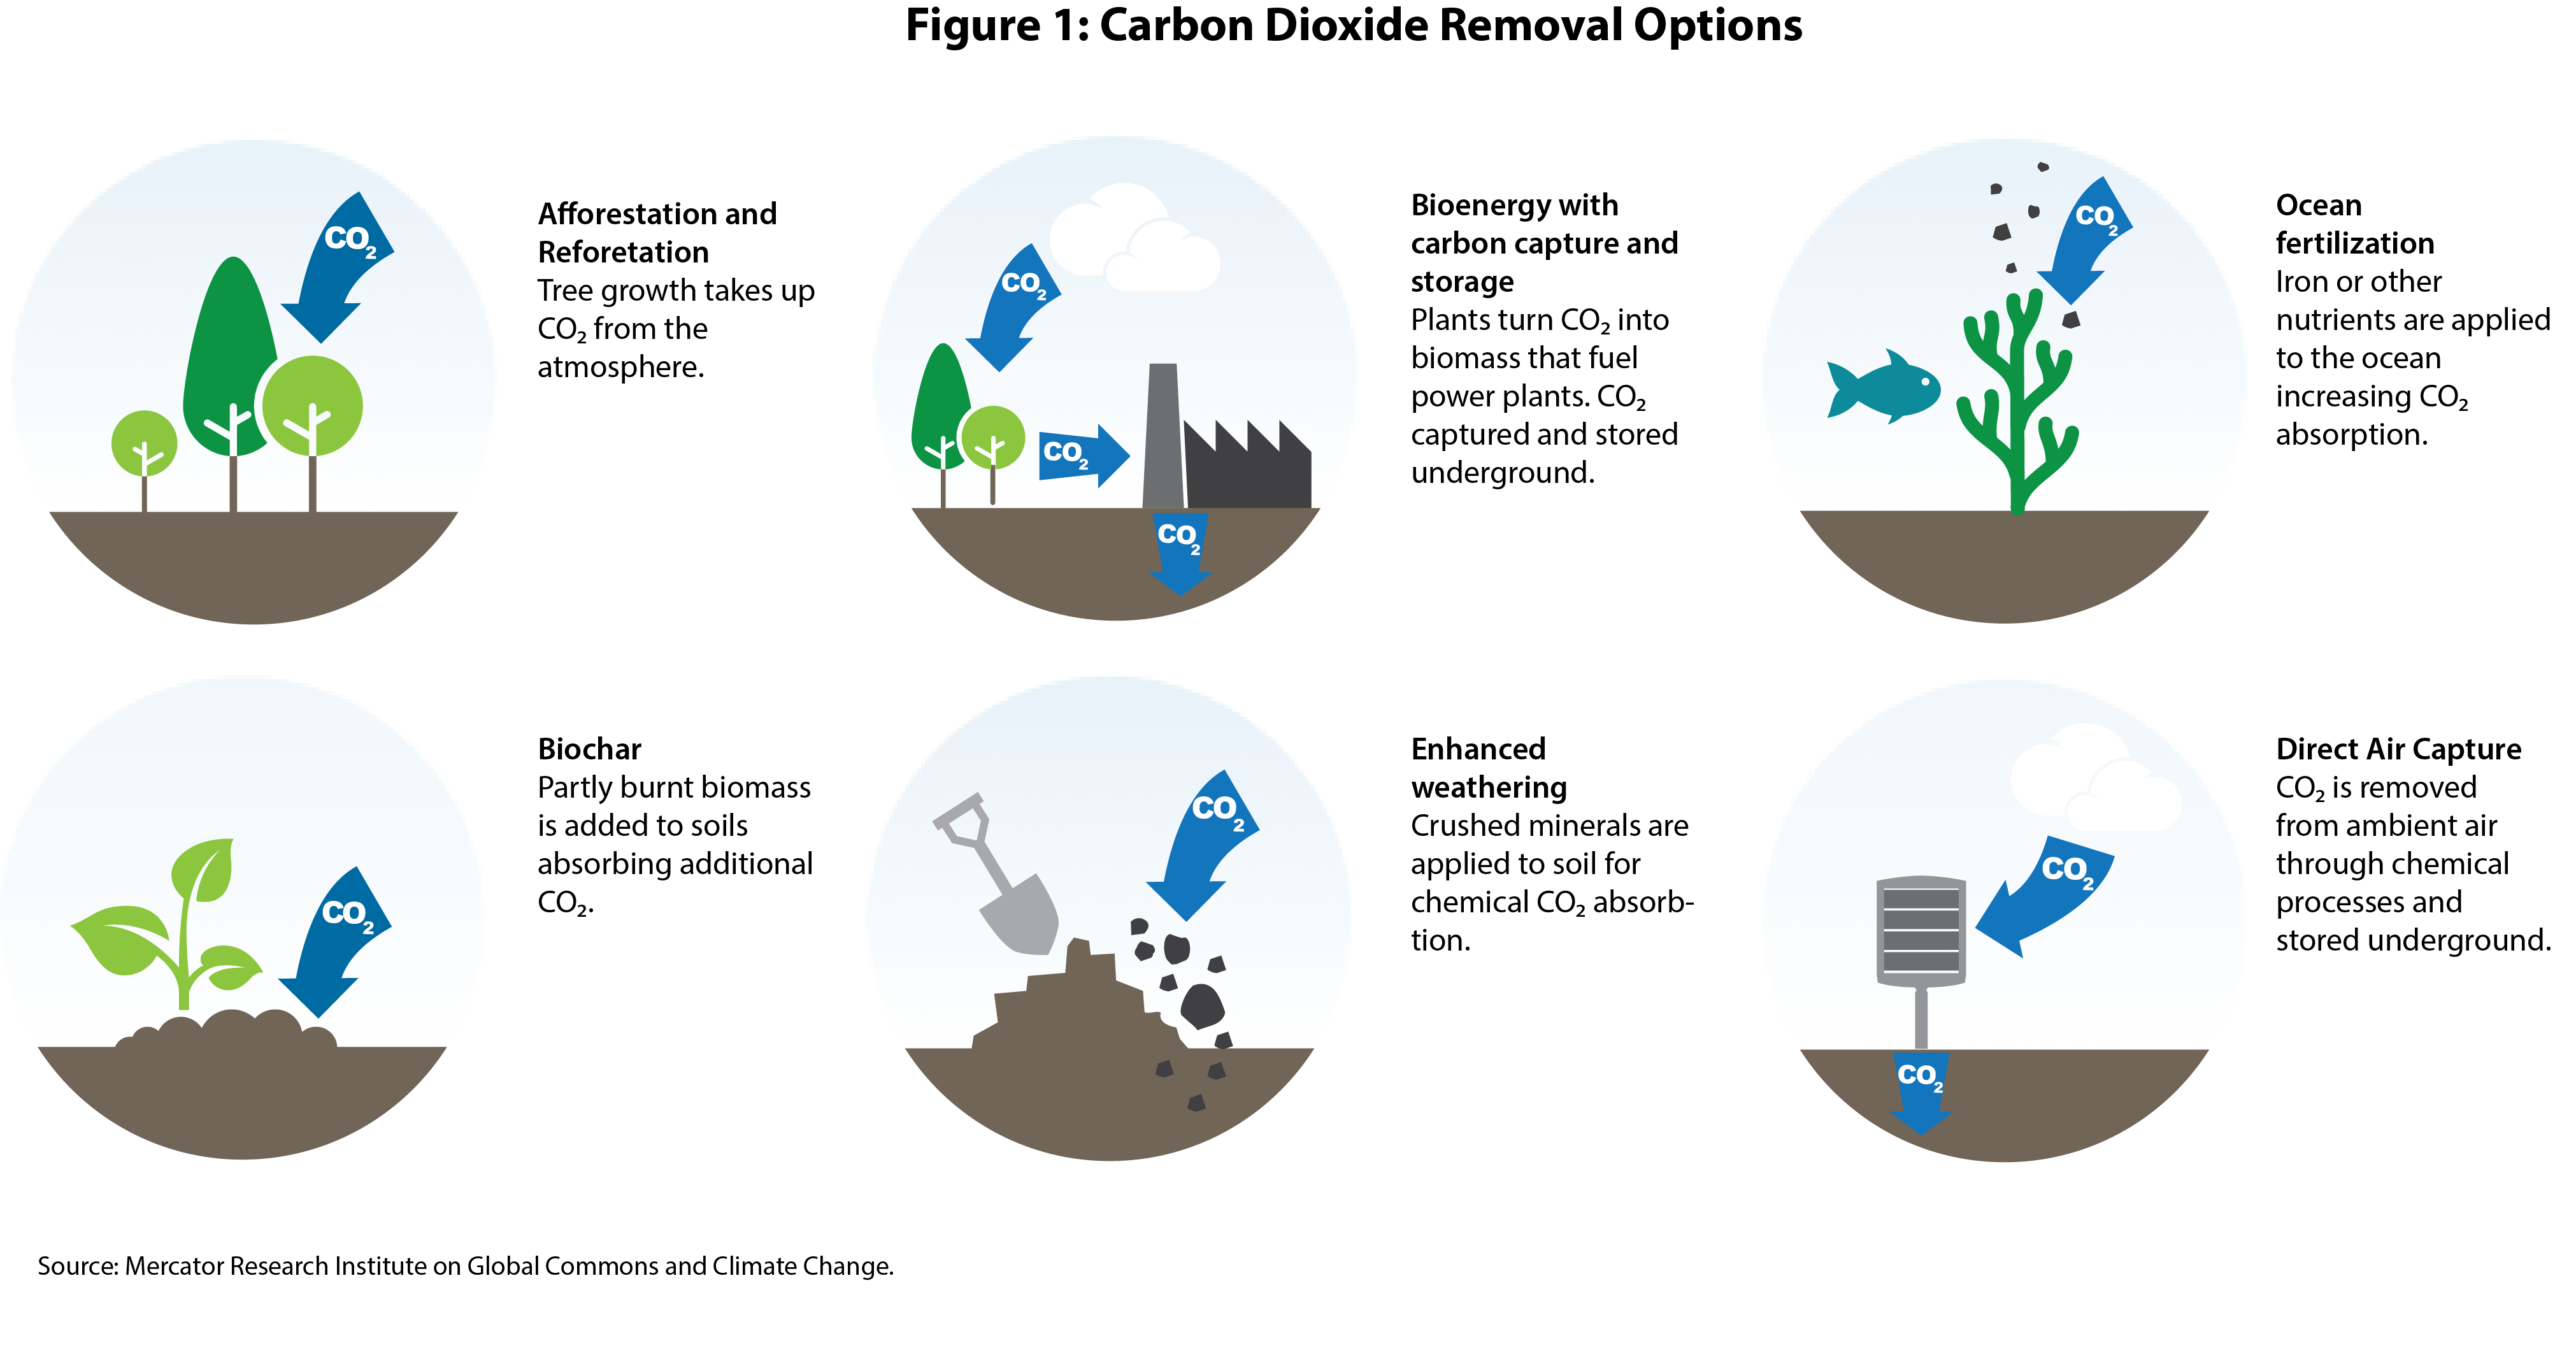 Figure 1 shows the six main carbon dioxide removal methods. These include afforestation and reforestation where tree growth absorbs CO2 from the atmosphere, bioenergy production with carbon capture and storage, ocean fertilization where nutrients are added to the ocean to aid in its ability to absorb CO2, biochar in which partially burnt biomass is added to the soil for additional CO2 absorption, enhanced weathering where minerals are crushed applied to soil that absorb CO2, and direct air capture where CO2 is removed from the ambient air through chemical processes.